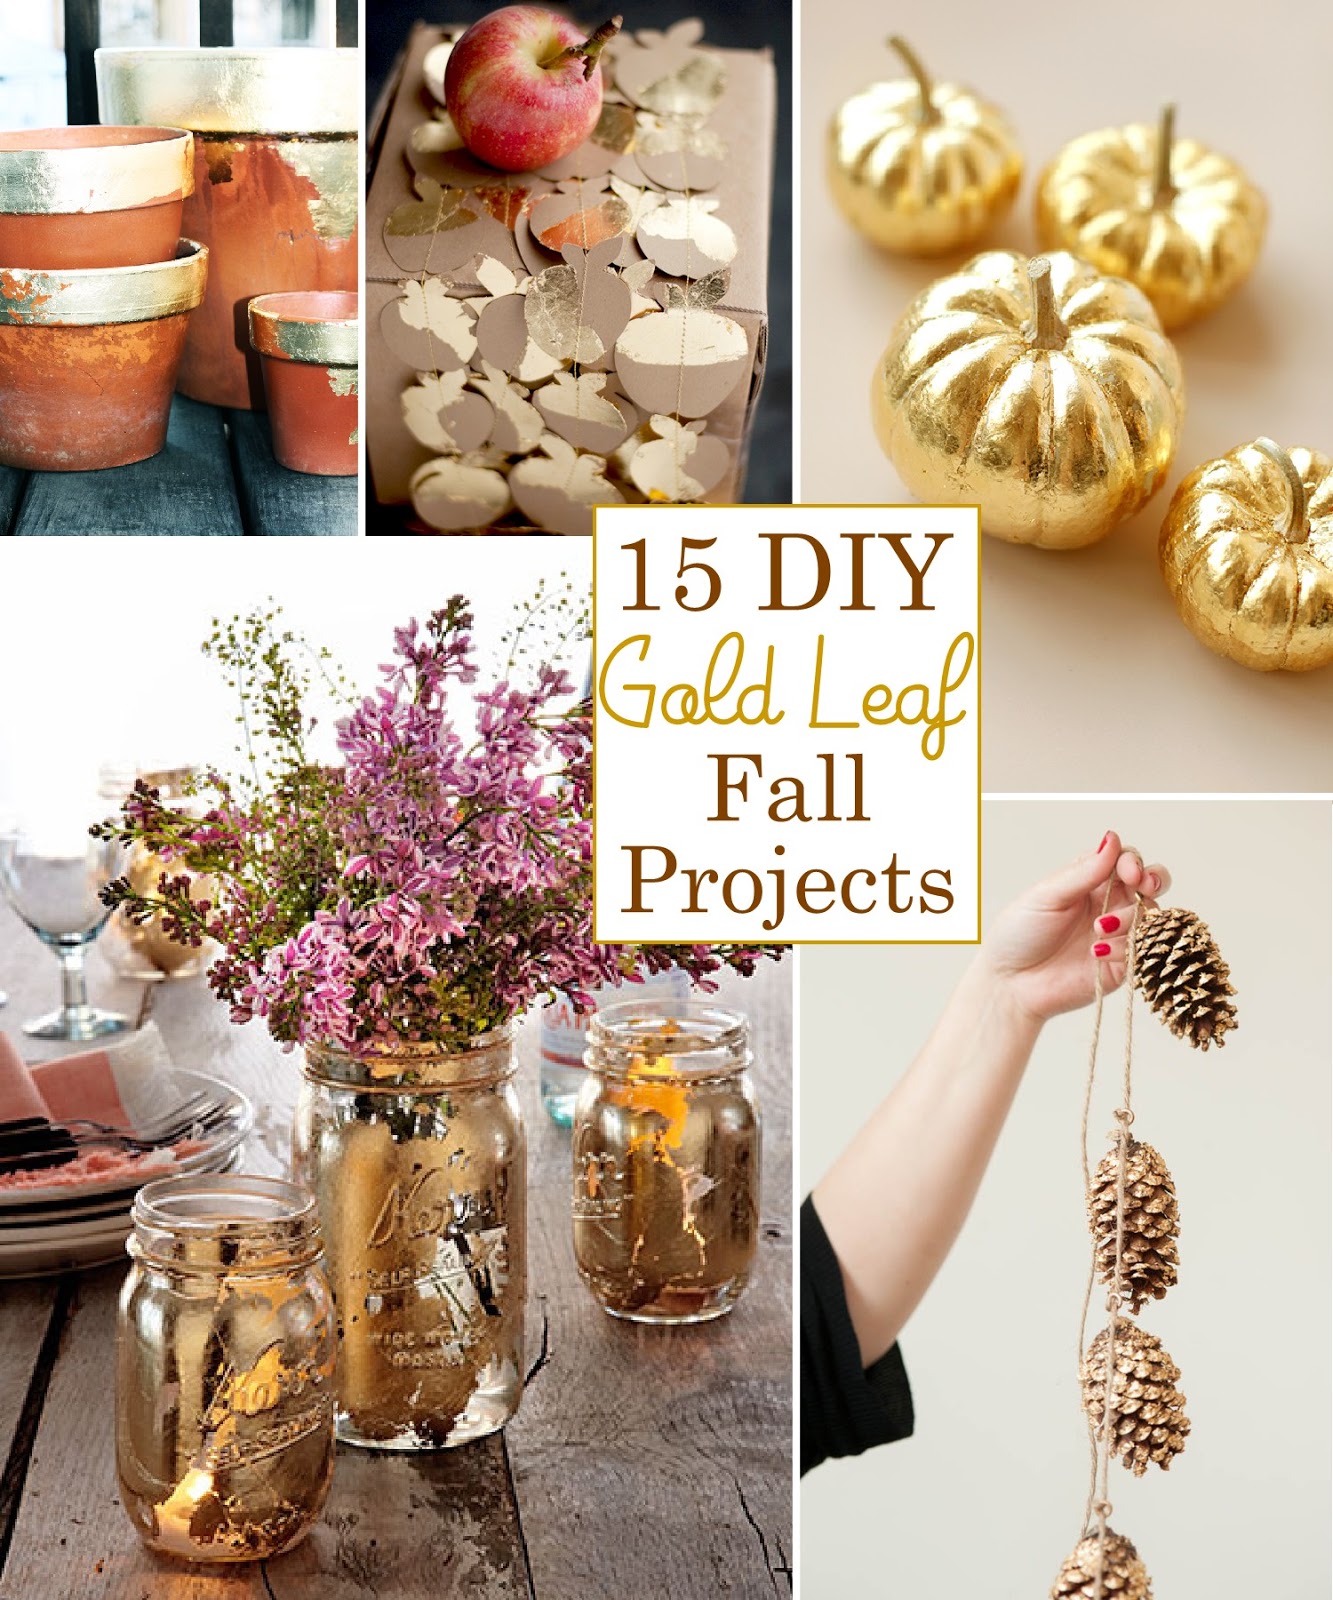 15 DIY Gold Leaf Projects for Fall - The Scrap Shoppe